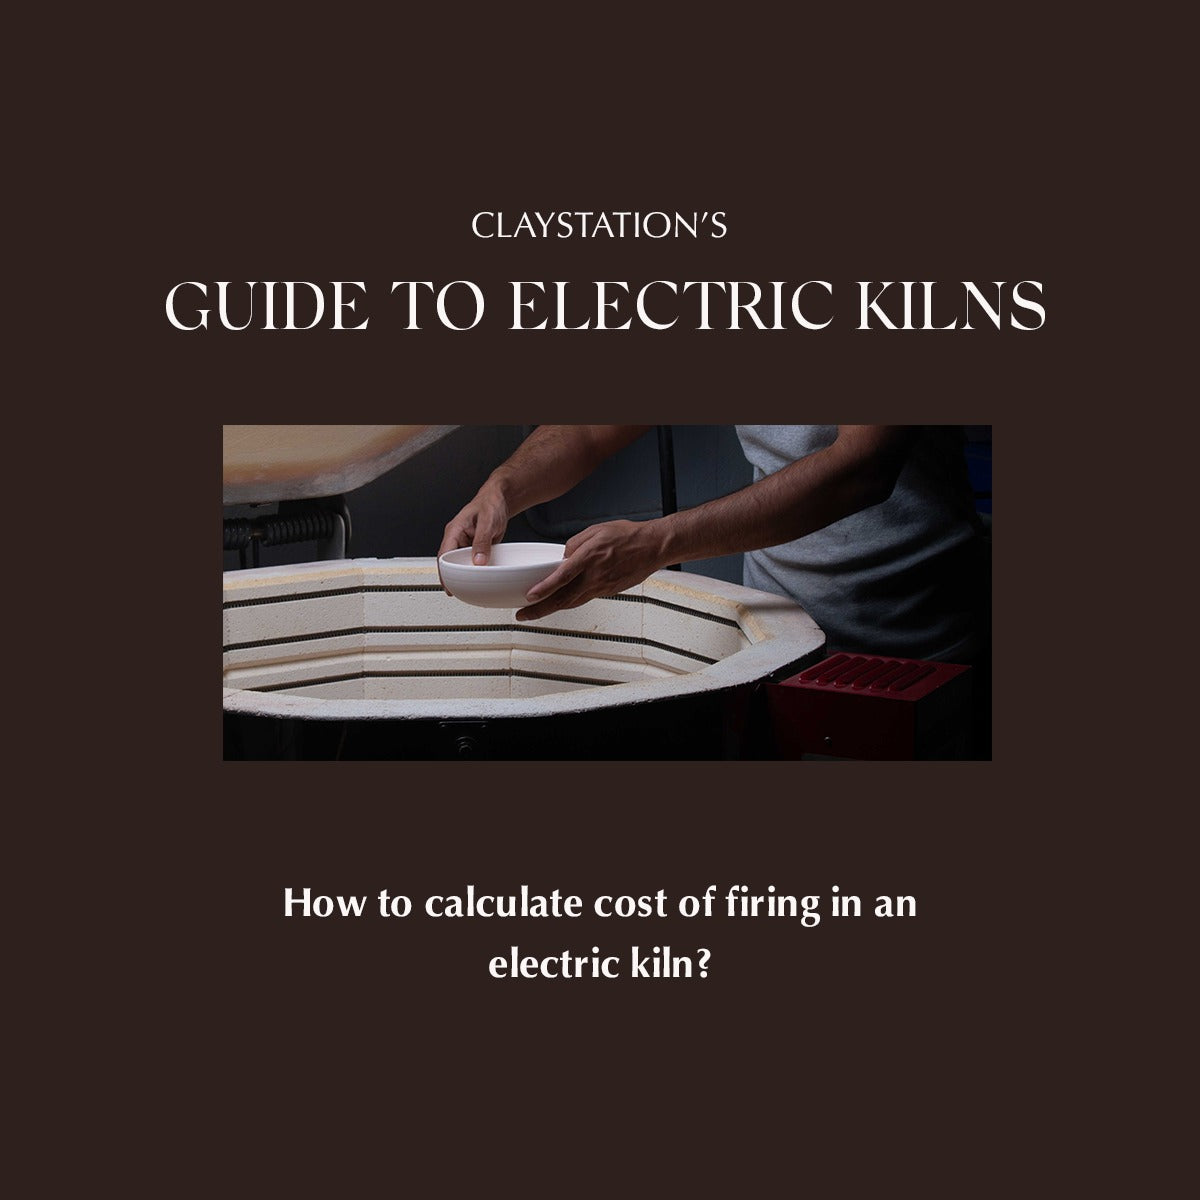 How to calculate cost of firing in an electric kiln?